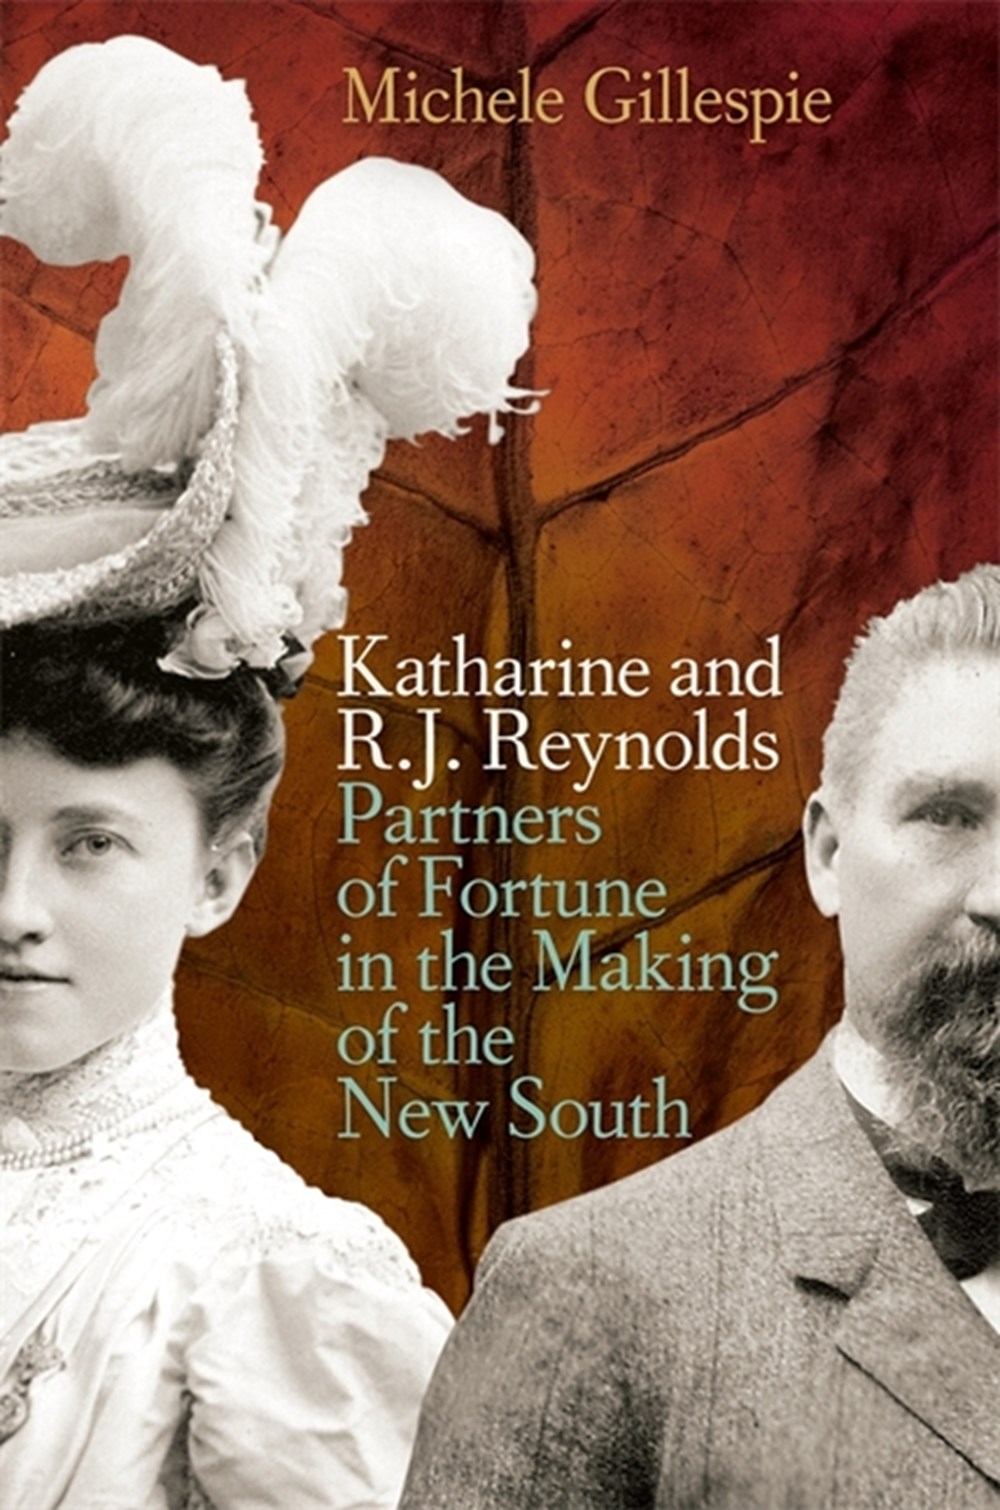 Katharine and R. J. Reynolds Partners of Fortune in the Making of the New South